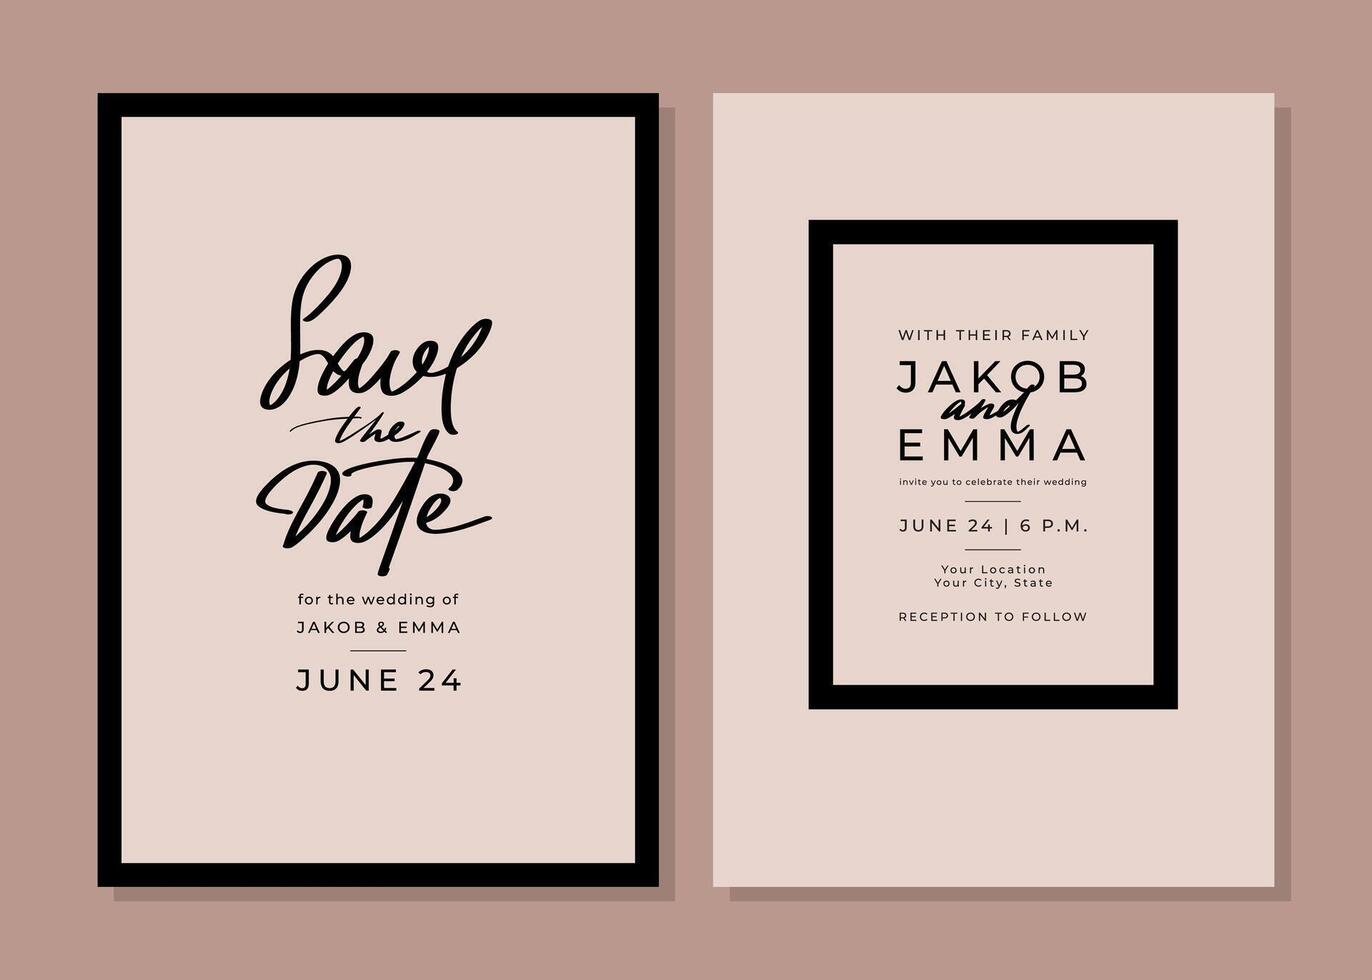 Set of wedding invitation cards. Classical style black and beige templates. Save the date. Layout design with handwritten typography and frame. RSVP vector